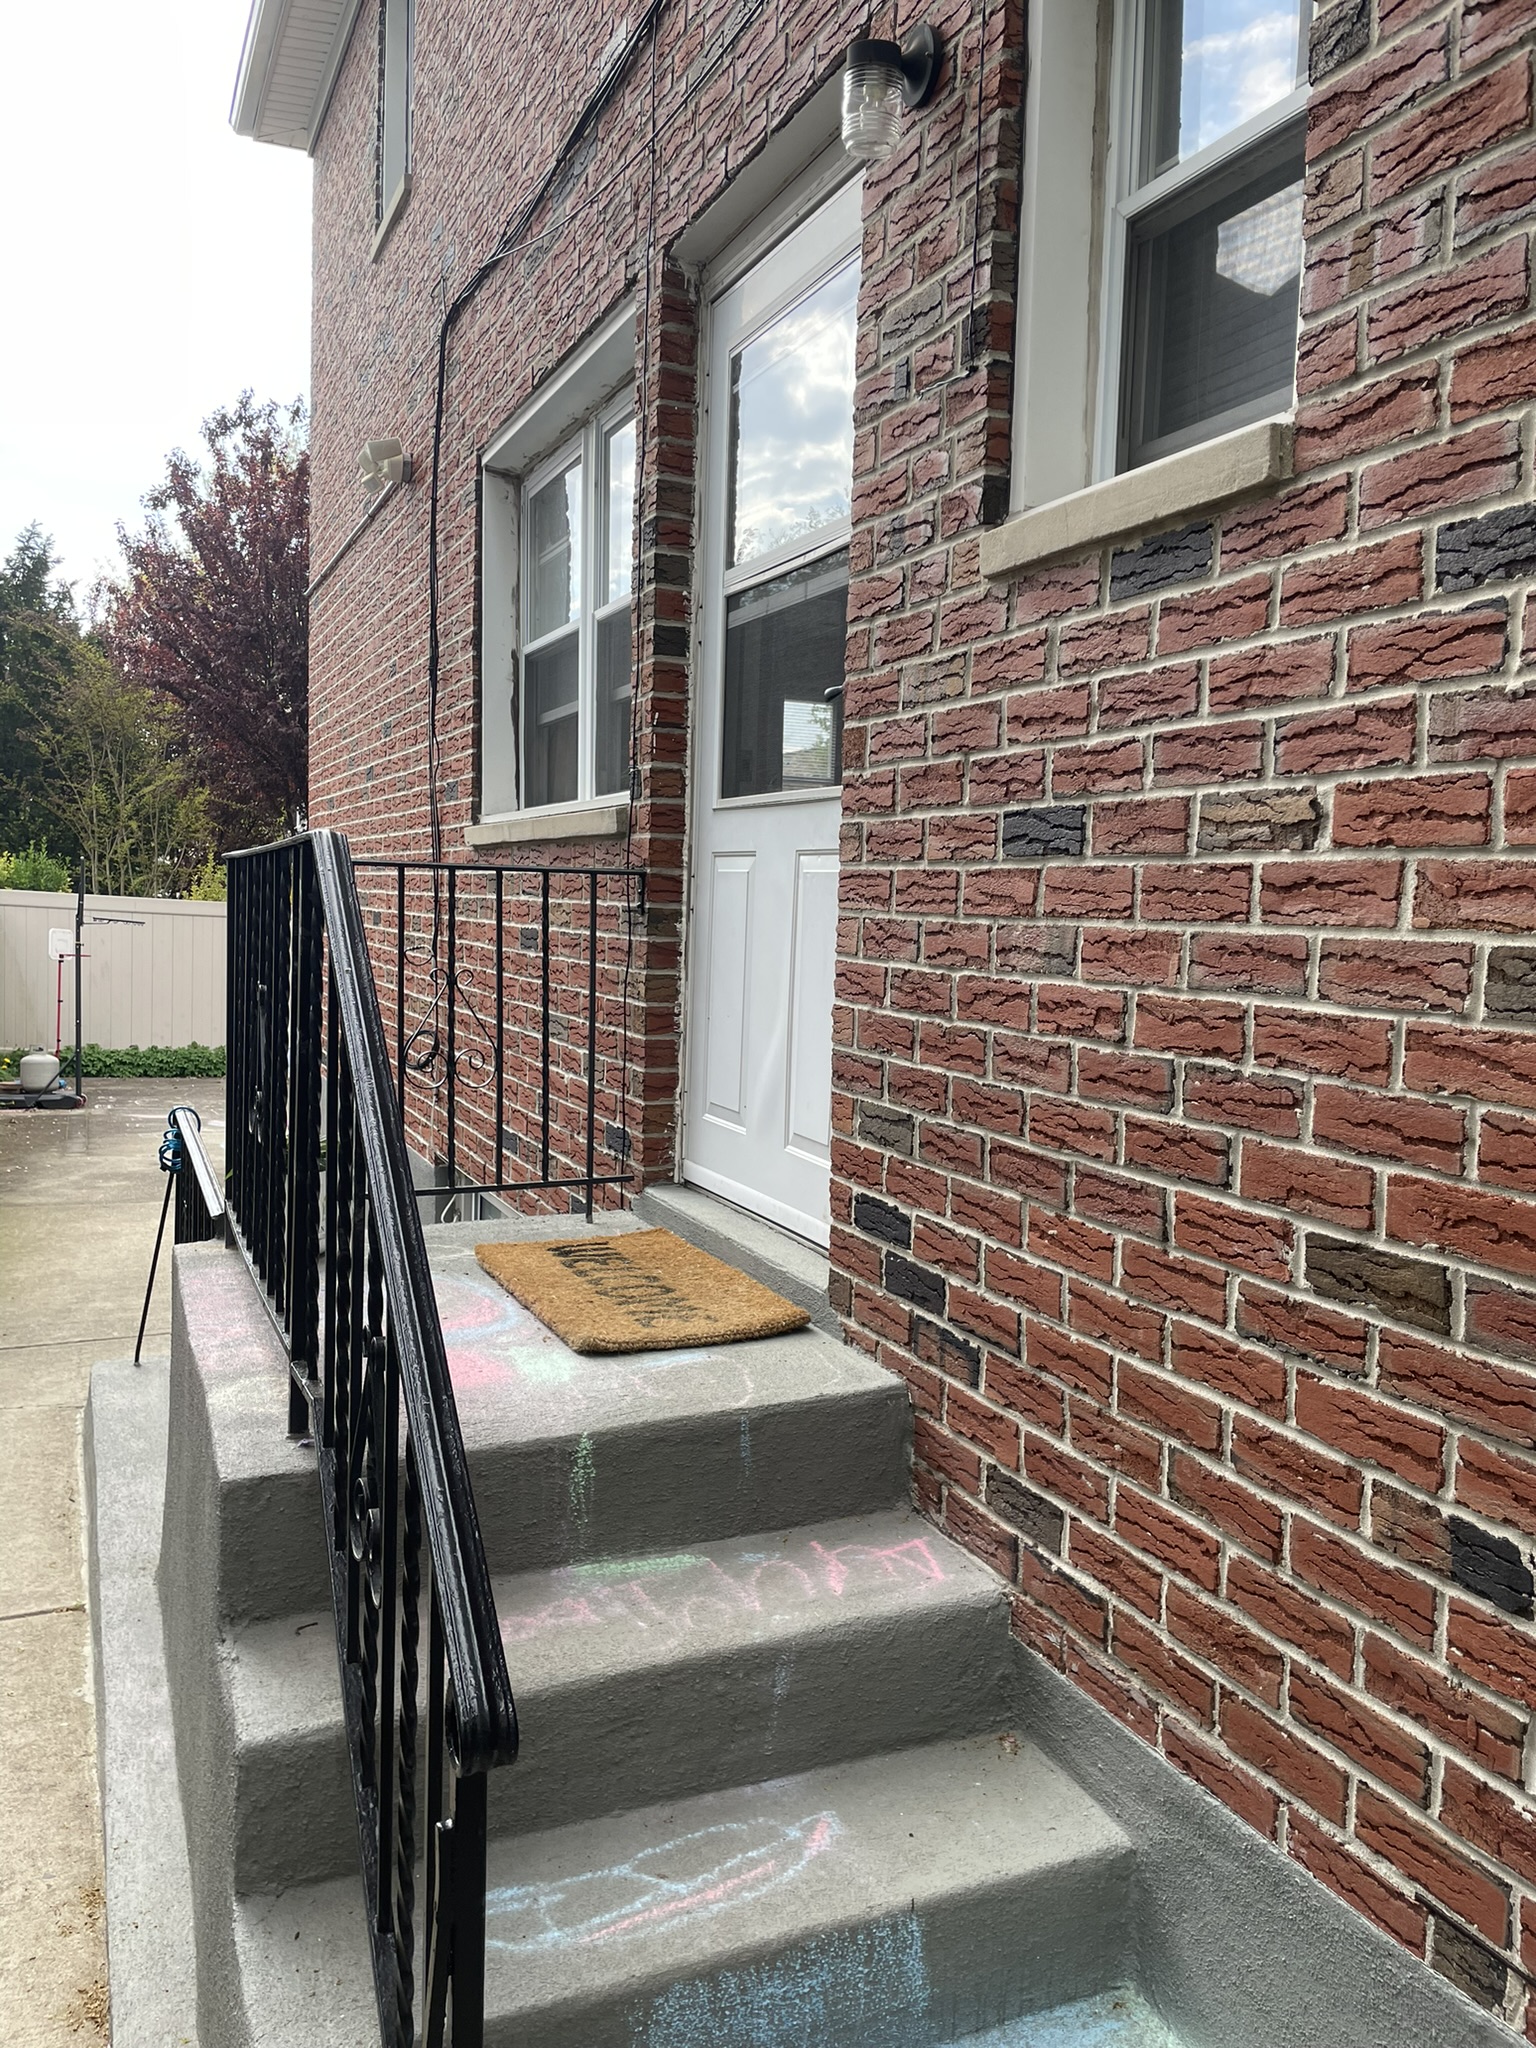 Cozy 1 Bedroom Apartment for Rent in Bayside. Not far from Bell Blvd. Features Livingroom, Open Kitchen, 1 Full Bathroom. All Wood Floors Throughout. Shared Use of Yard. Heat and Water Included. Convenient to Transportation and Shops.